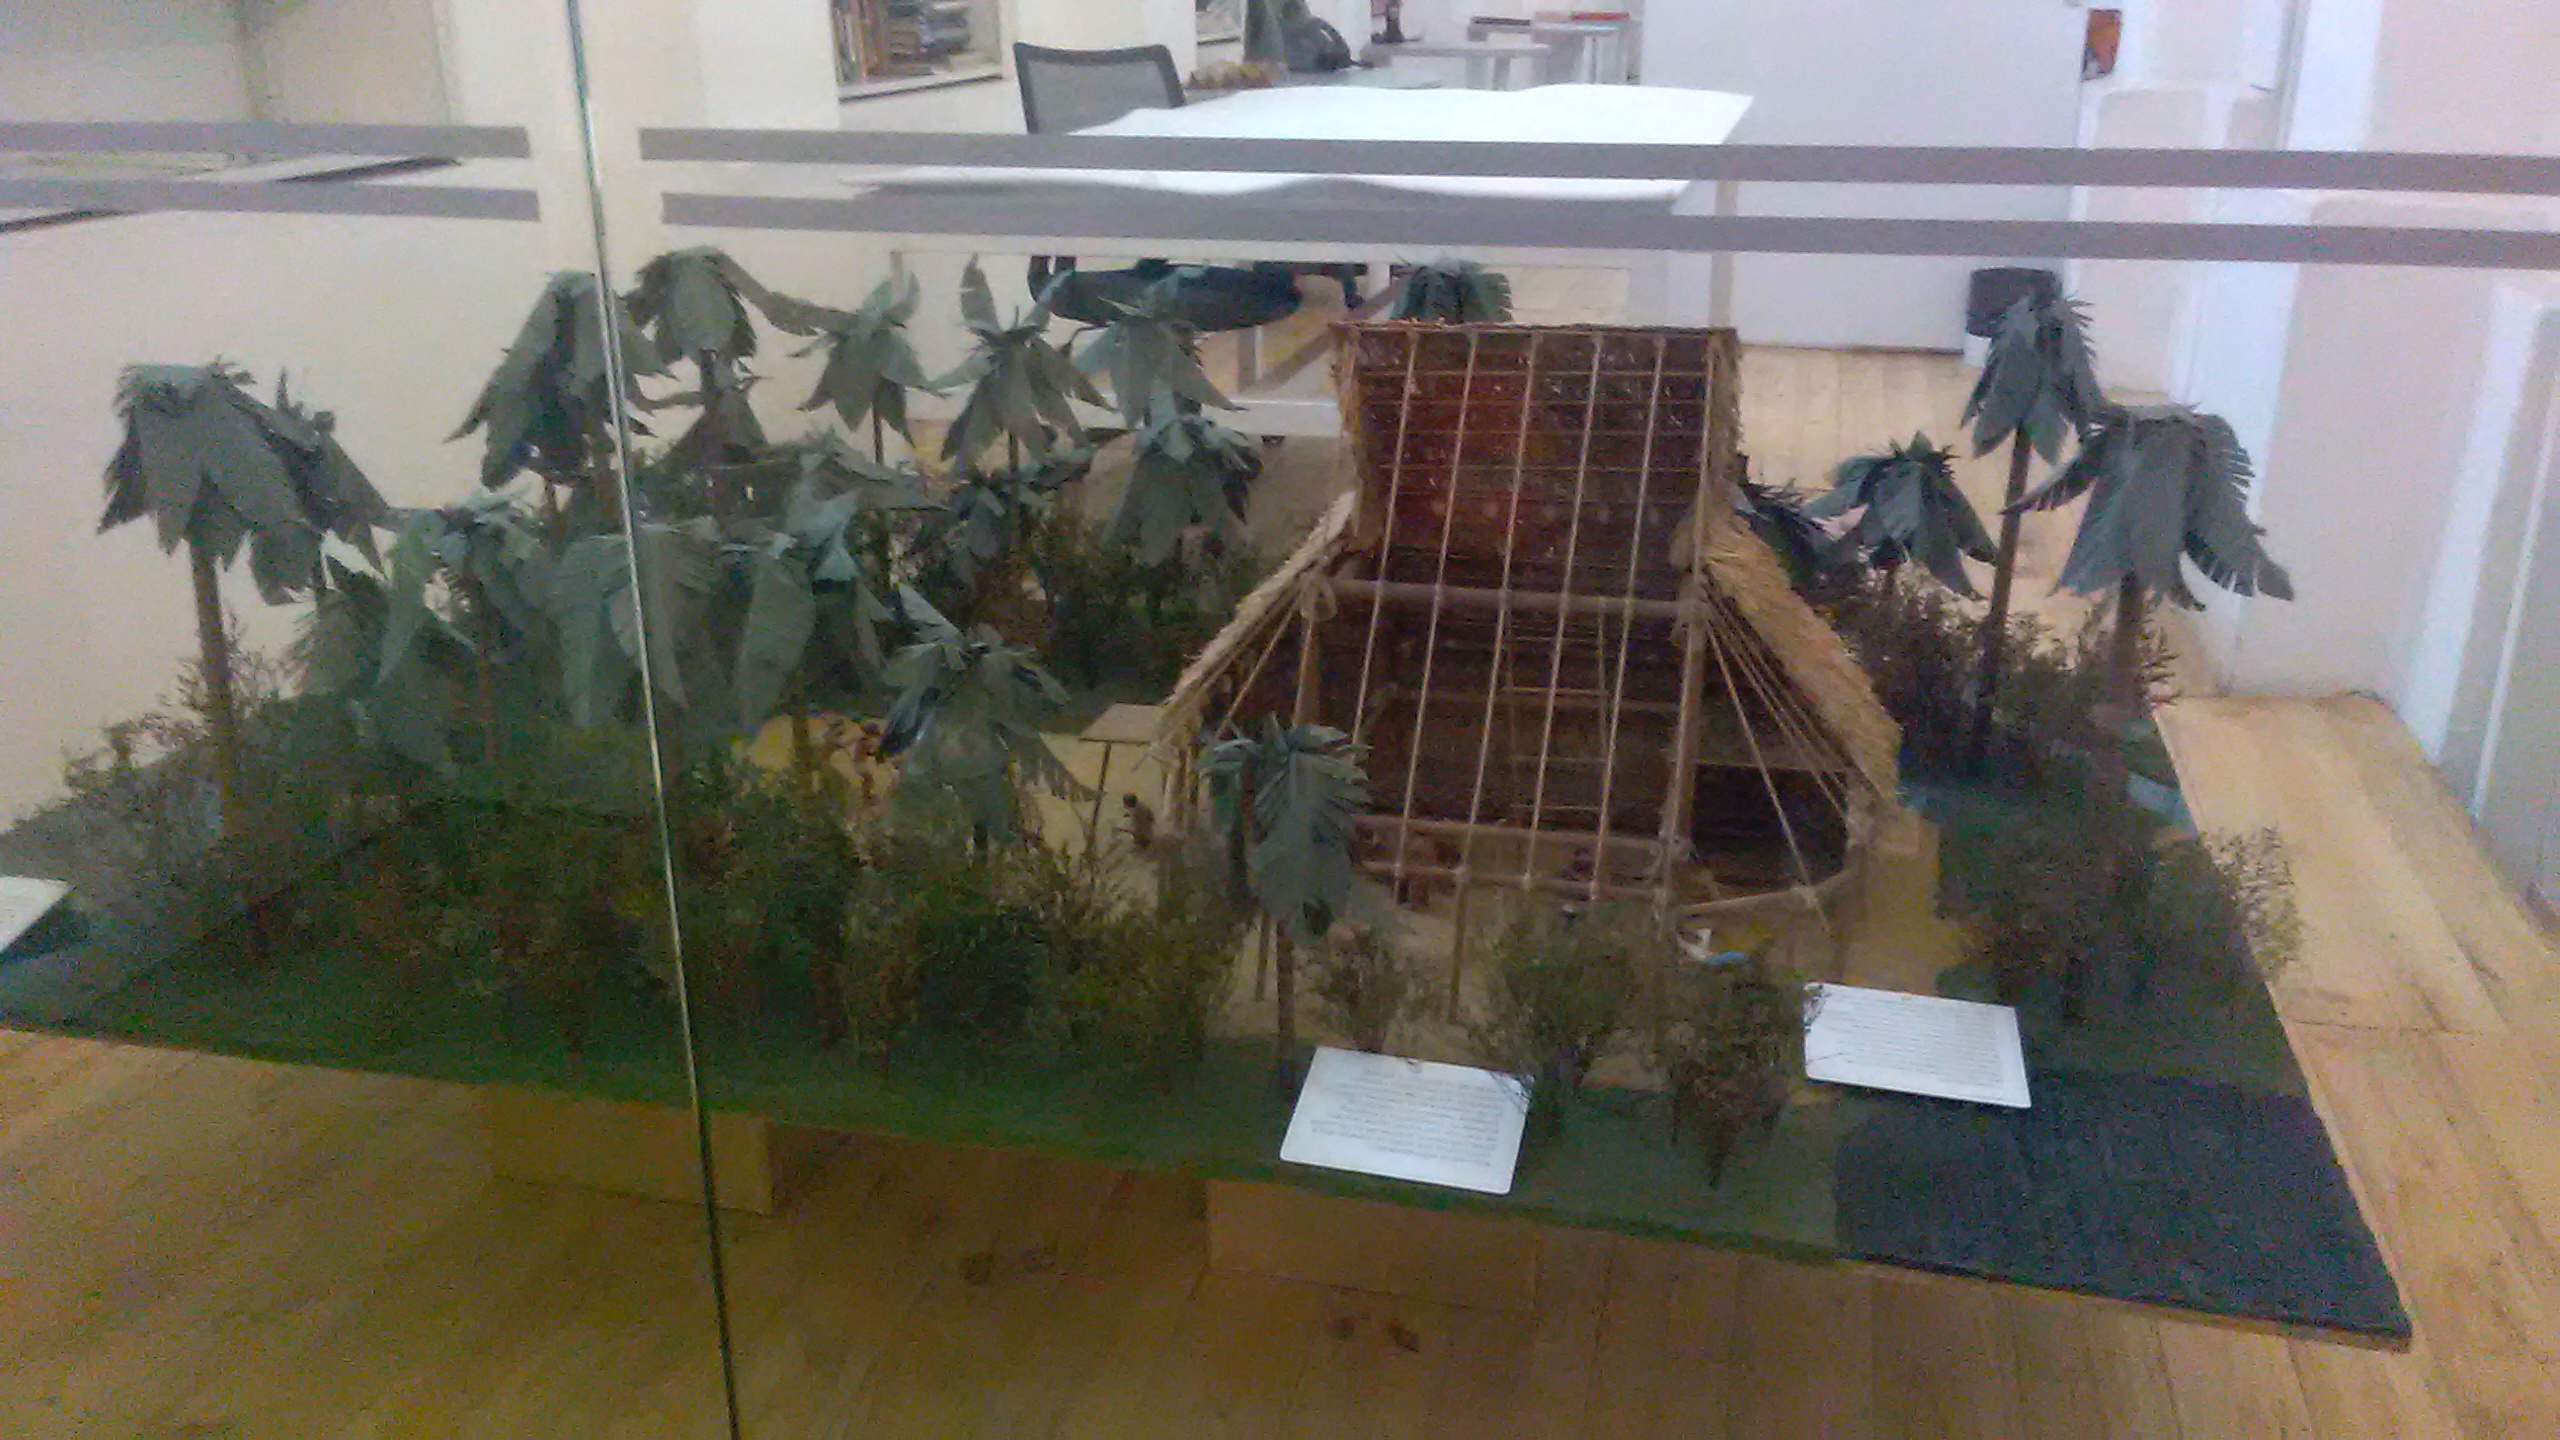 Model of indigenous house in Bogotá's Museo Nacional